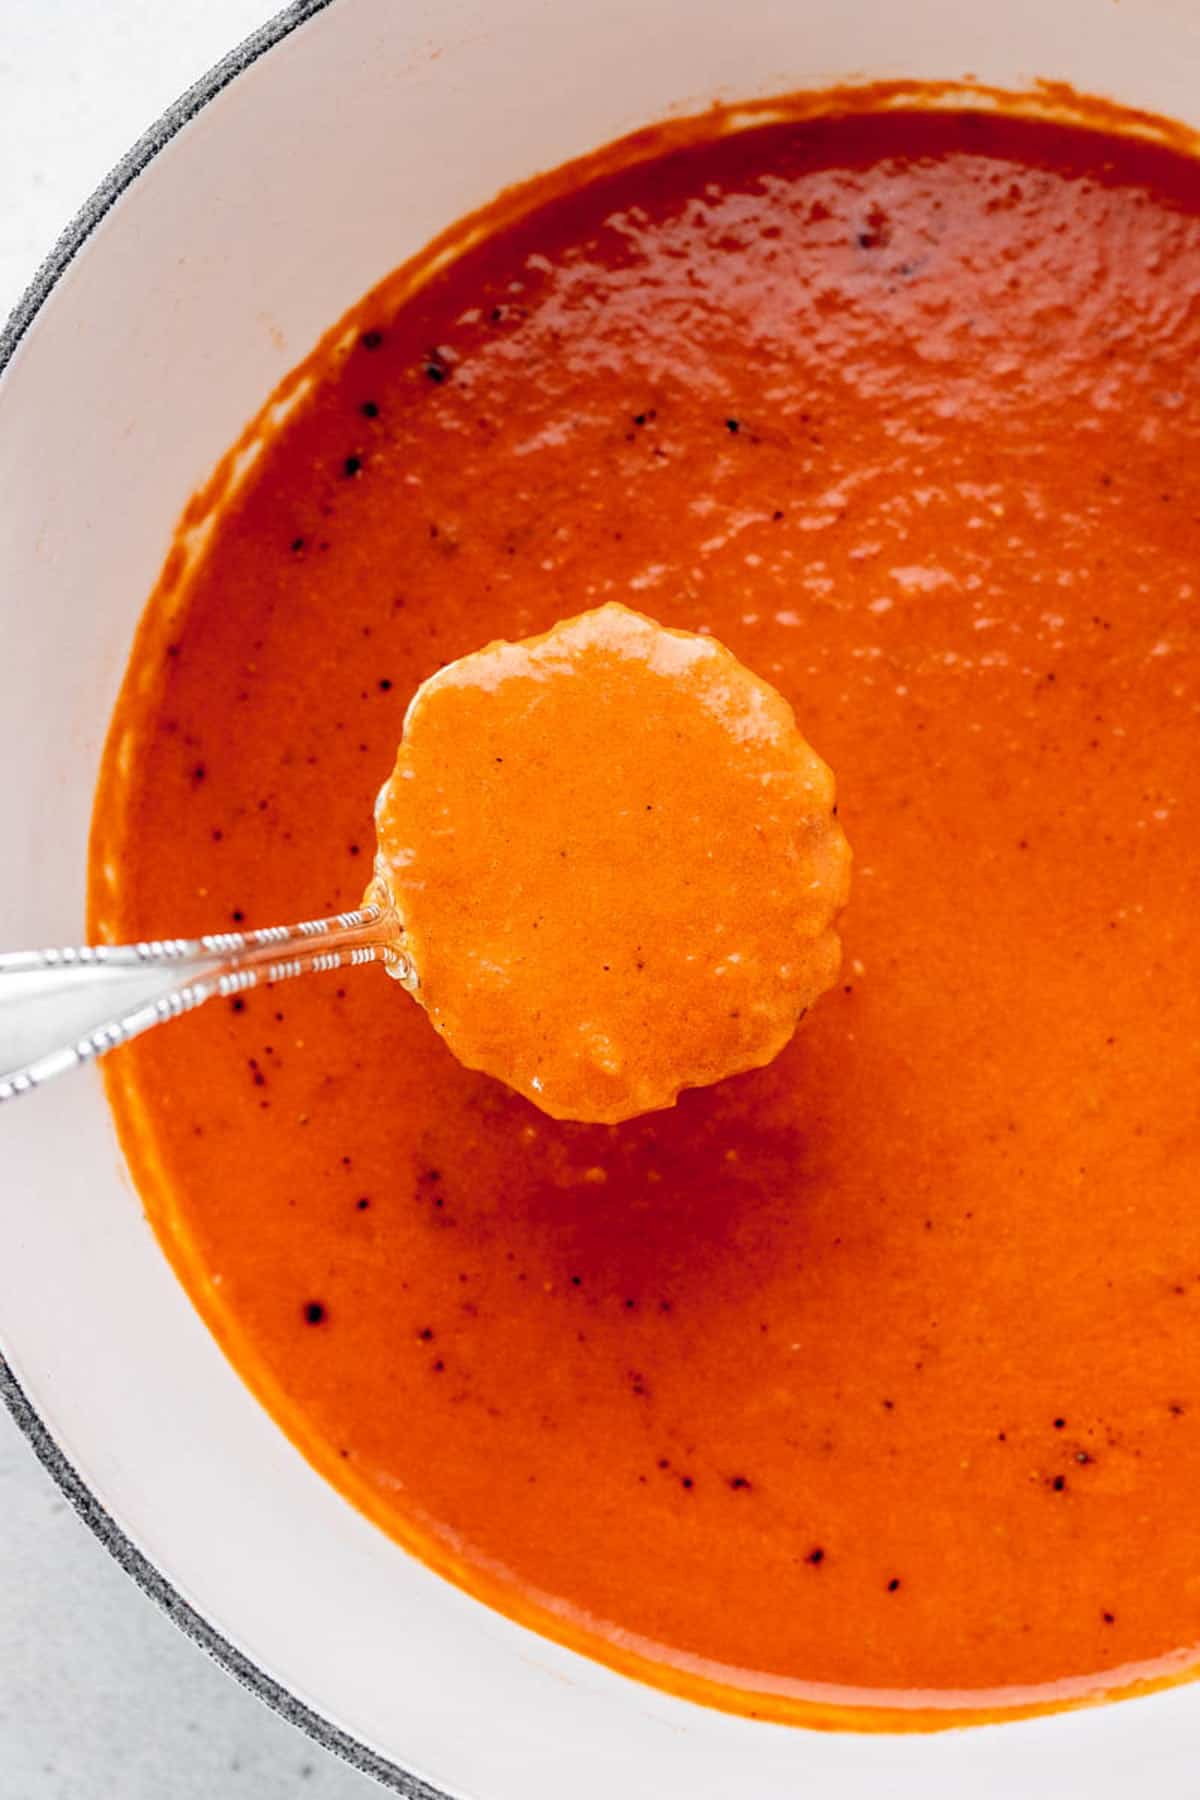 A ladle scooping out a serving of healthy tomato soup.